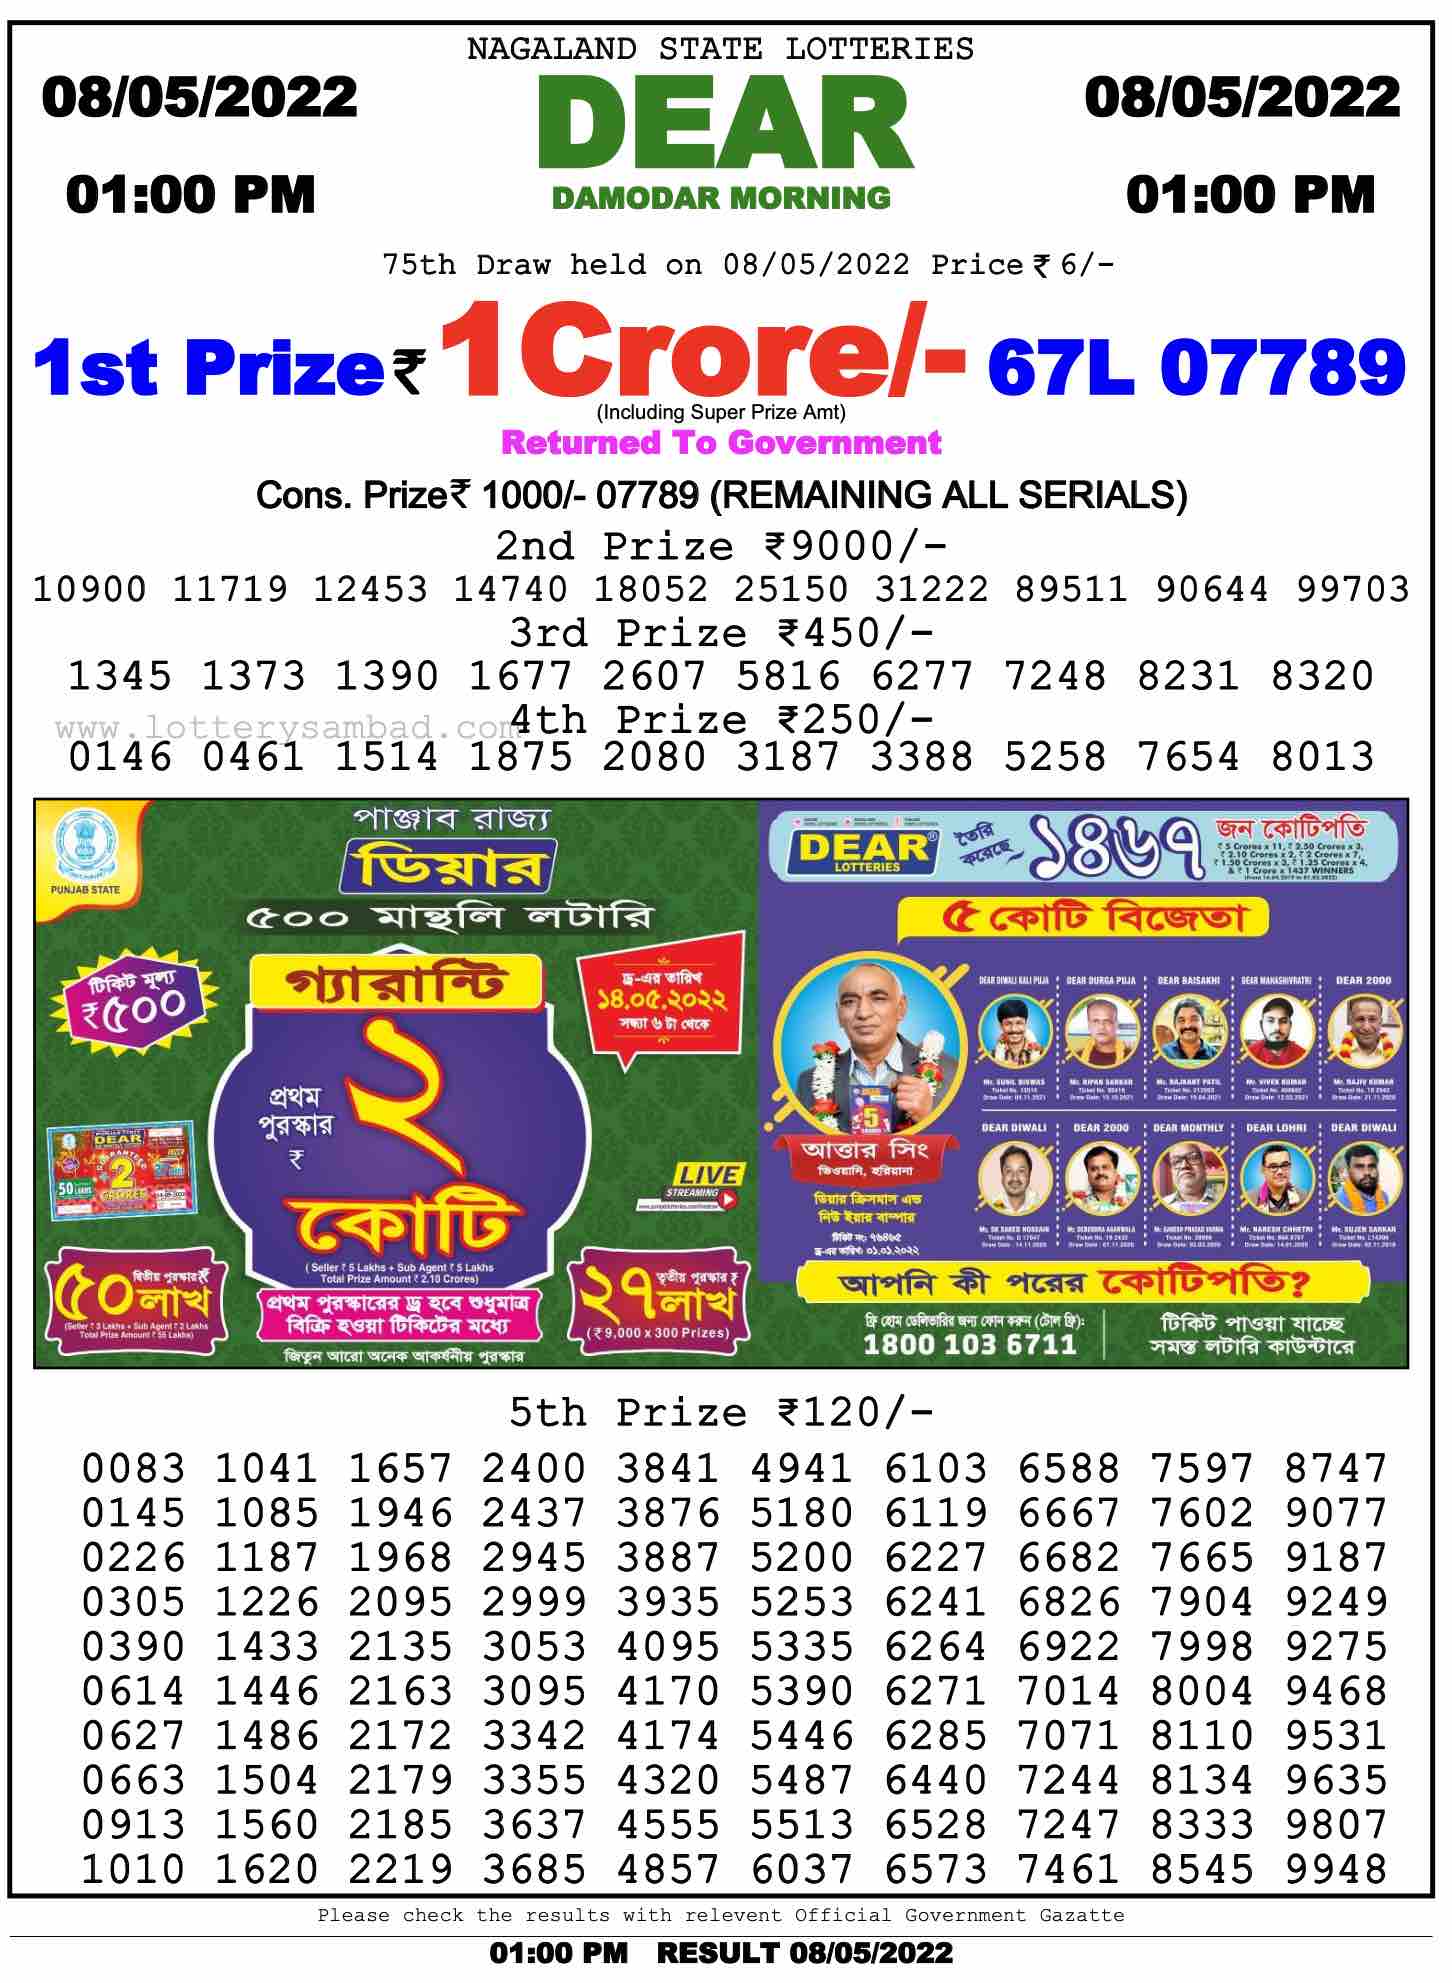 Download Result of Nagaland State Dear 6 08-05-2022 Draw at 1:00Pm